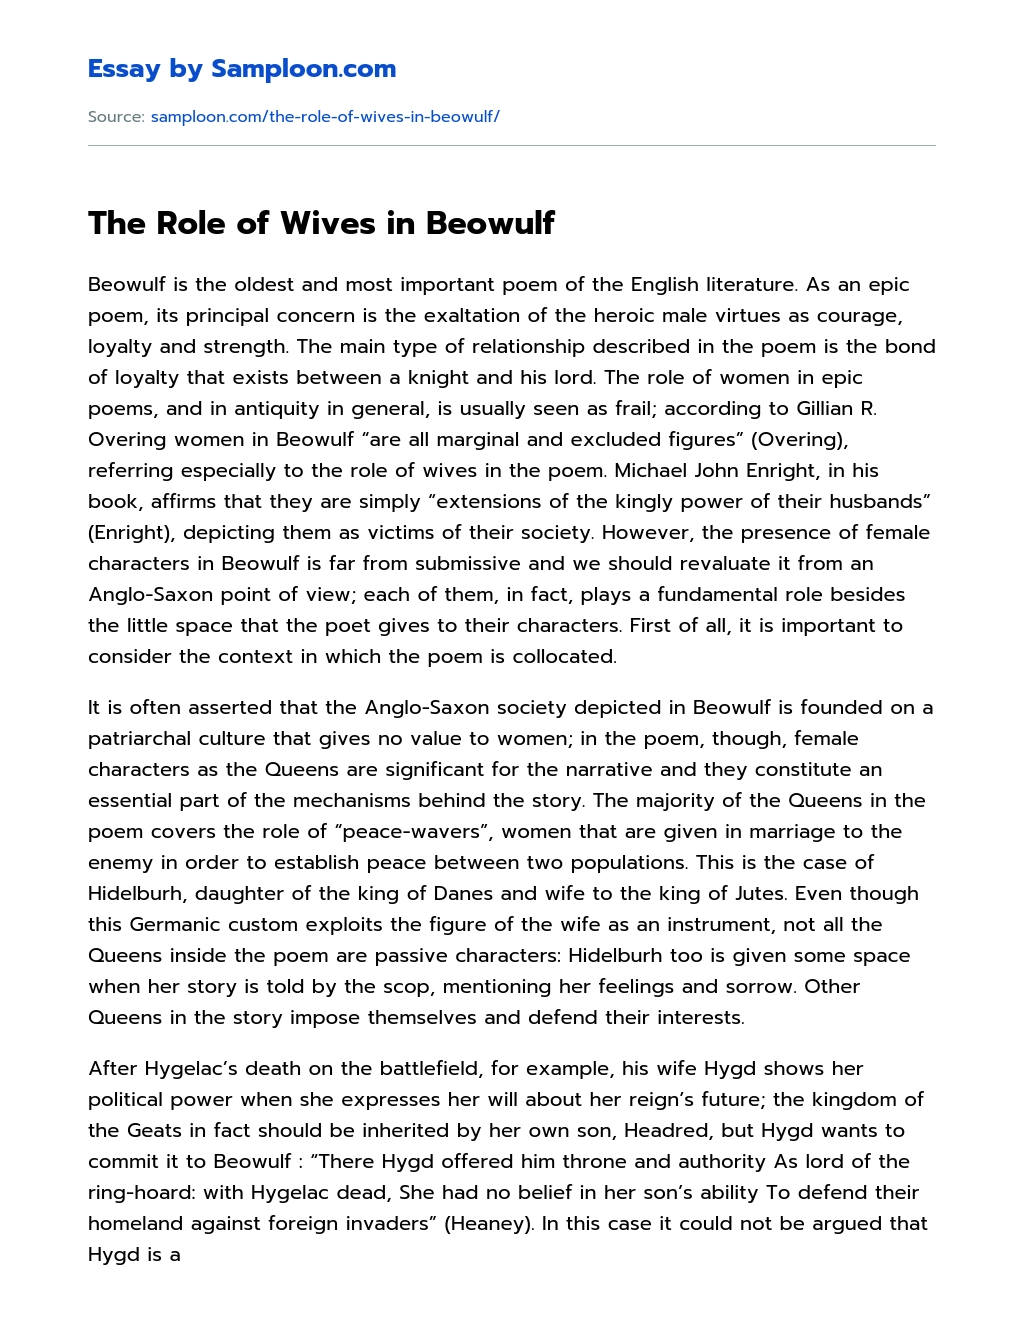 The Role of Wives in Beowulf Review essay